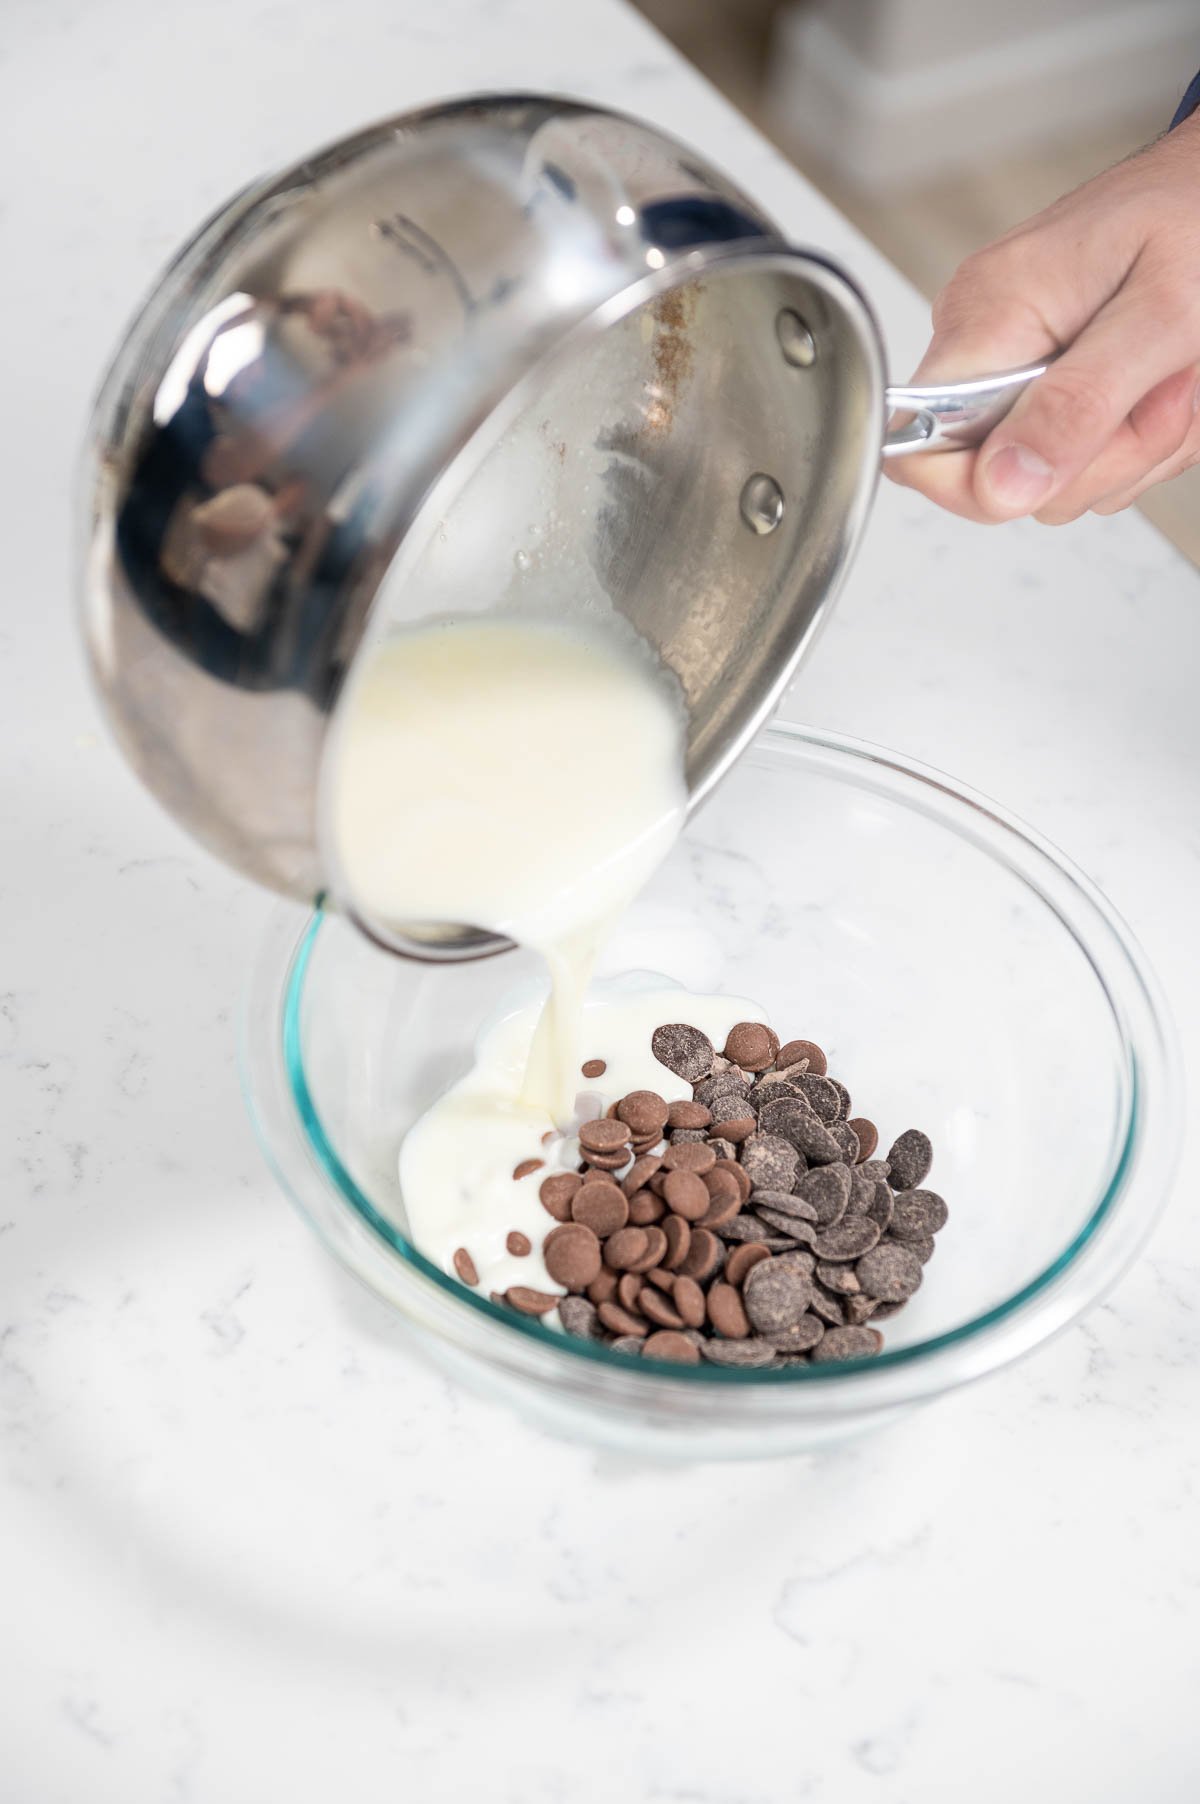 pouring cream over chocolate inside mixing bowl